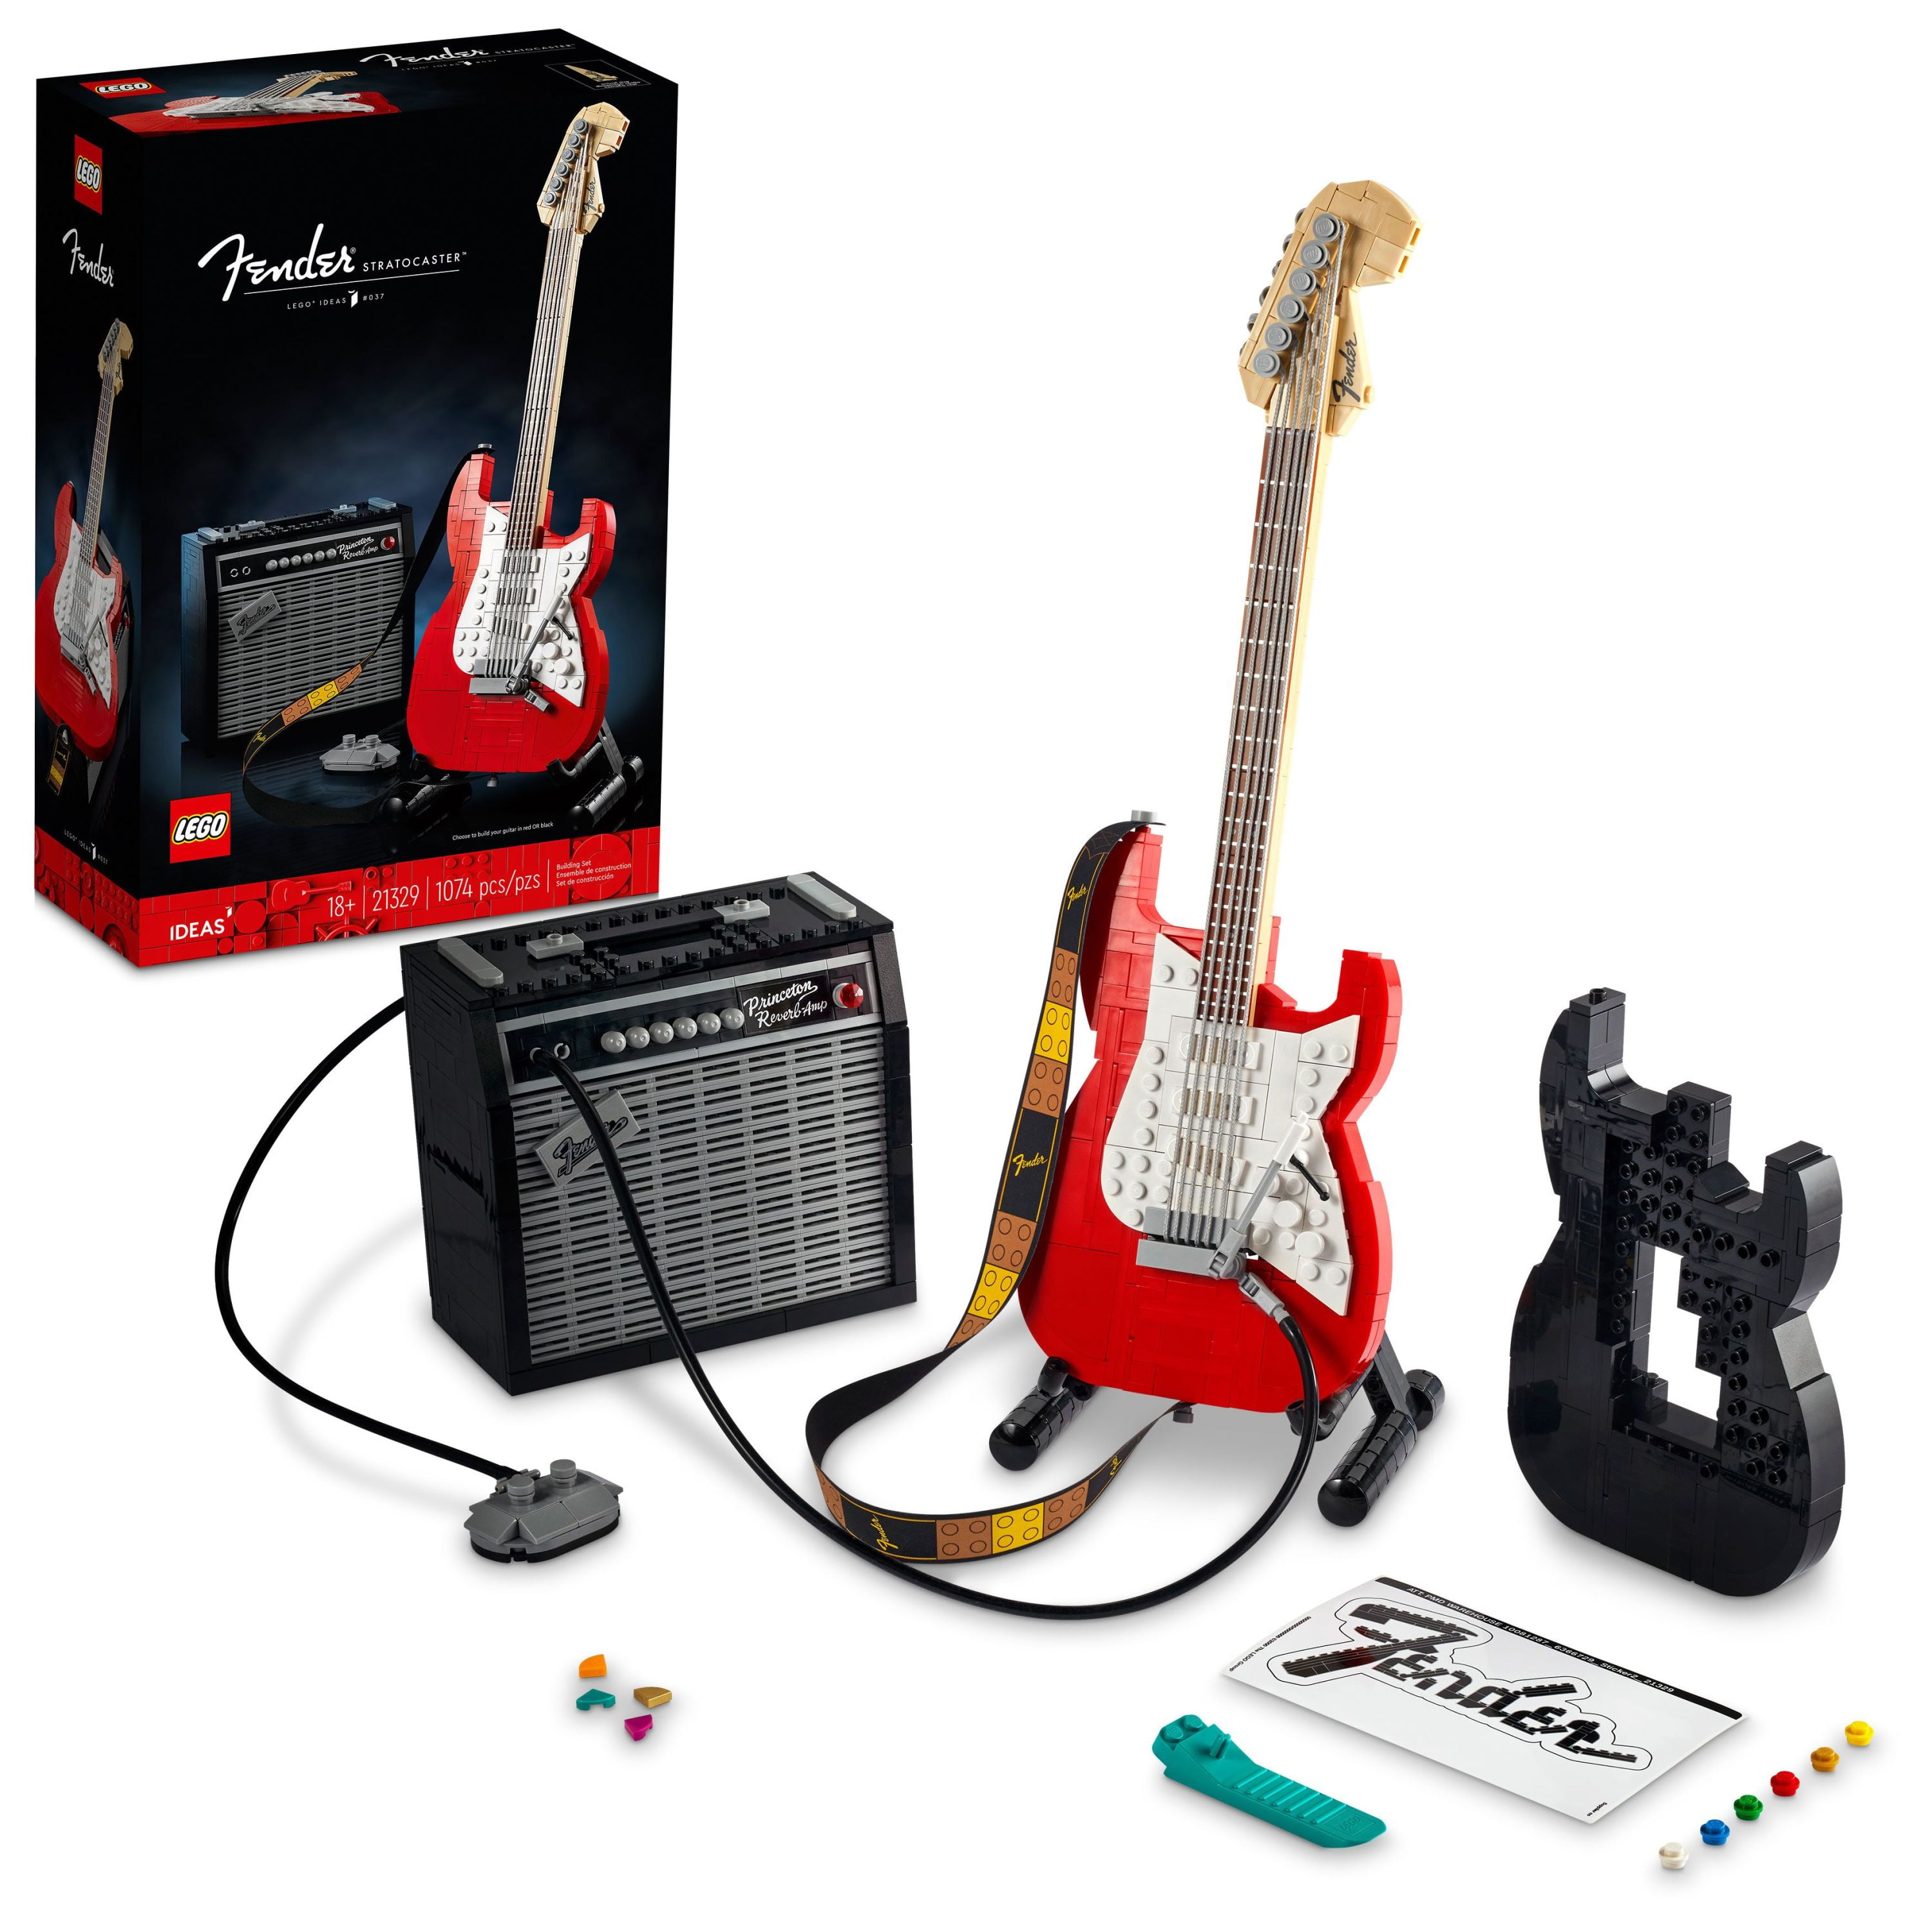 killing hval skam LEGO Ideas Fender Stratocaster 21329 DIY Guitar Model Building Set with 65  Princeton Reverb Amplifier & Authentic Accessories, Great Birthday Gift -  Walmart.com